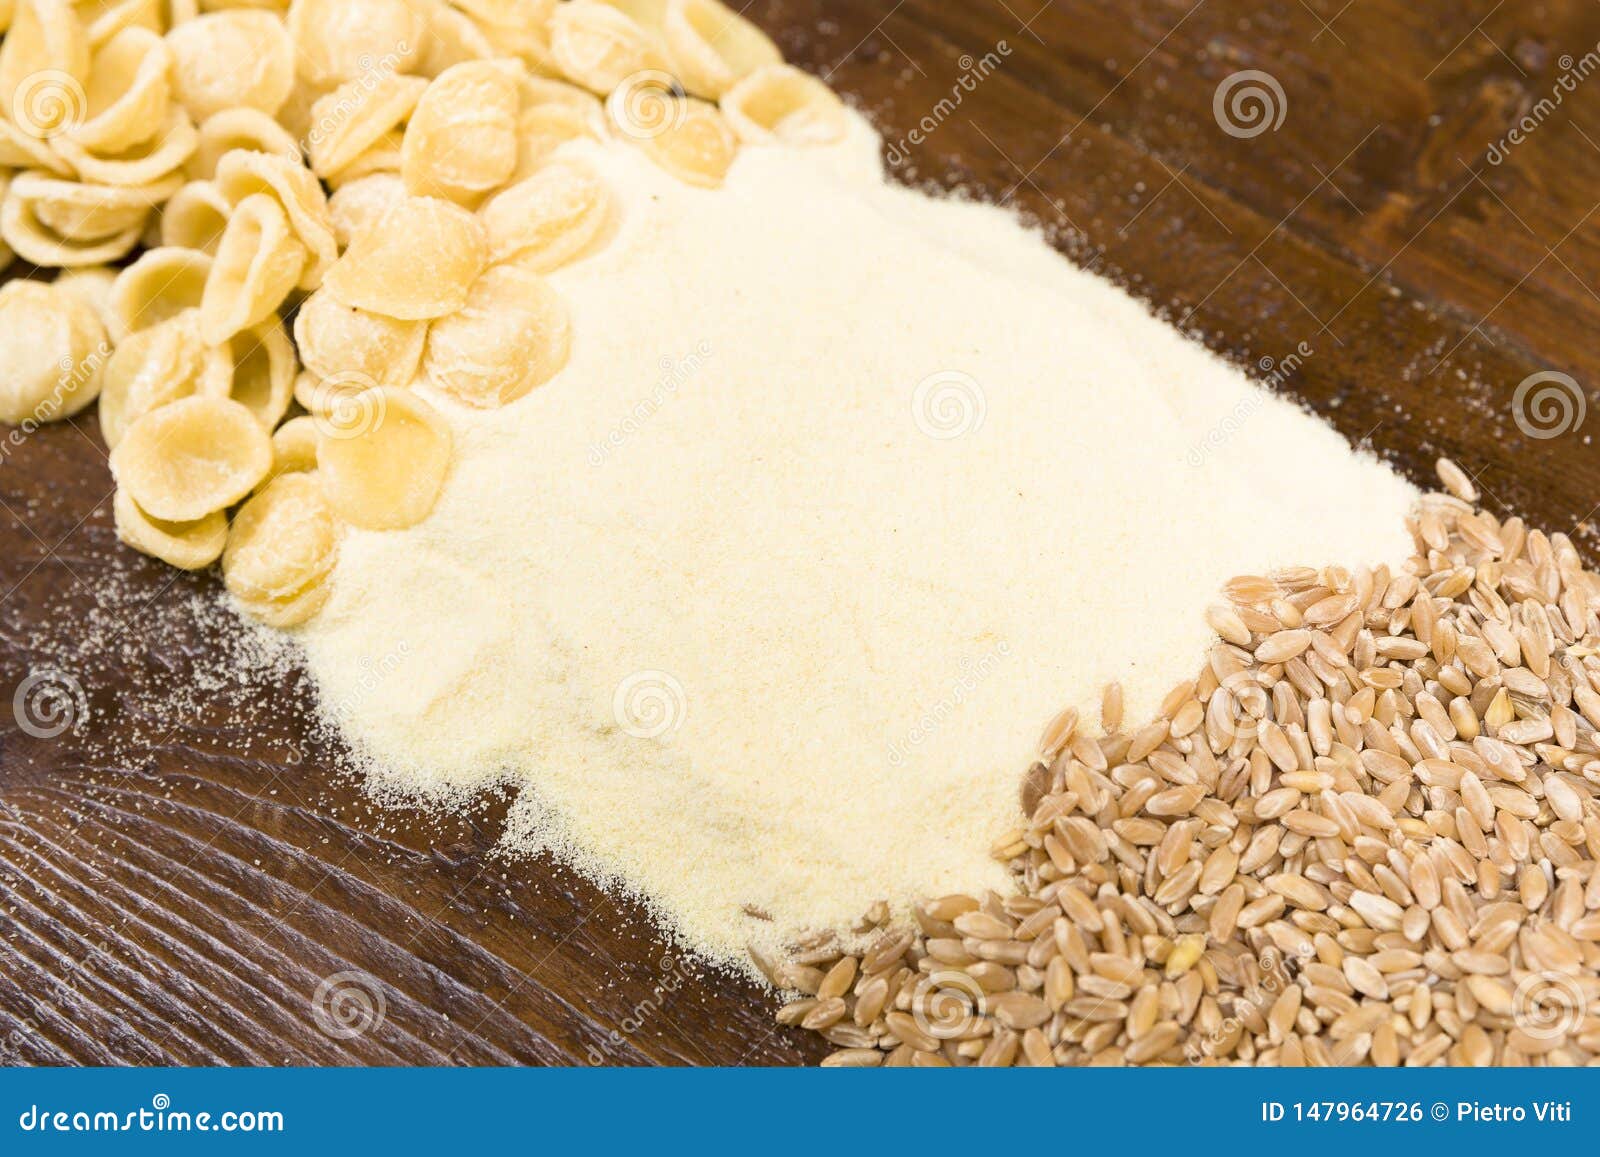 wheat grains, pasta and flour on a wooden table